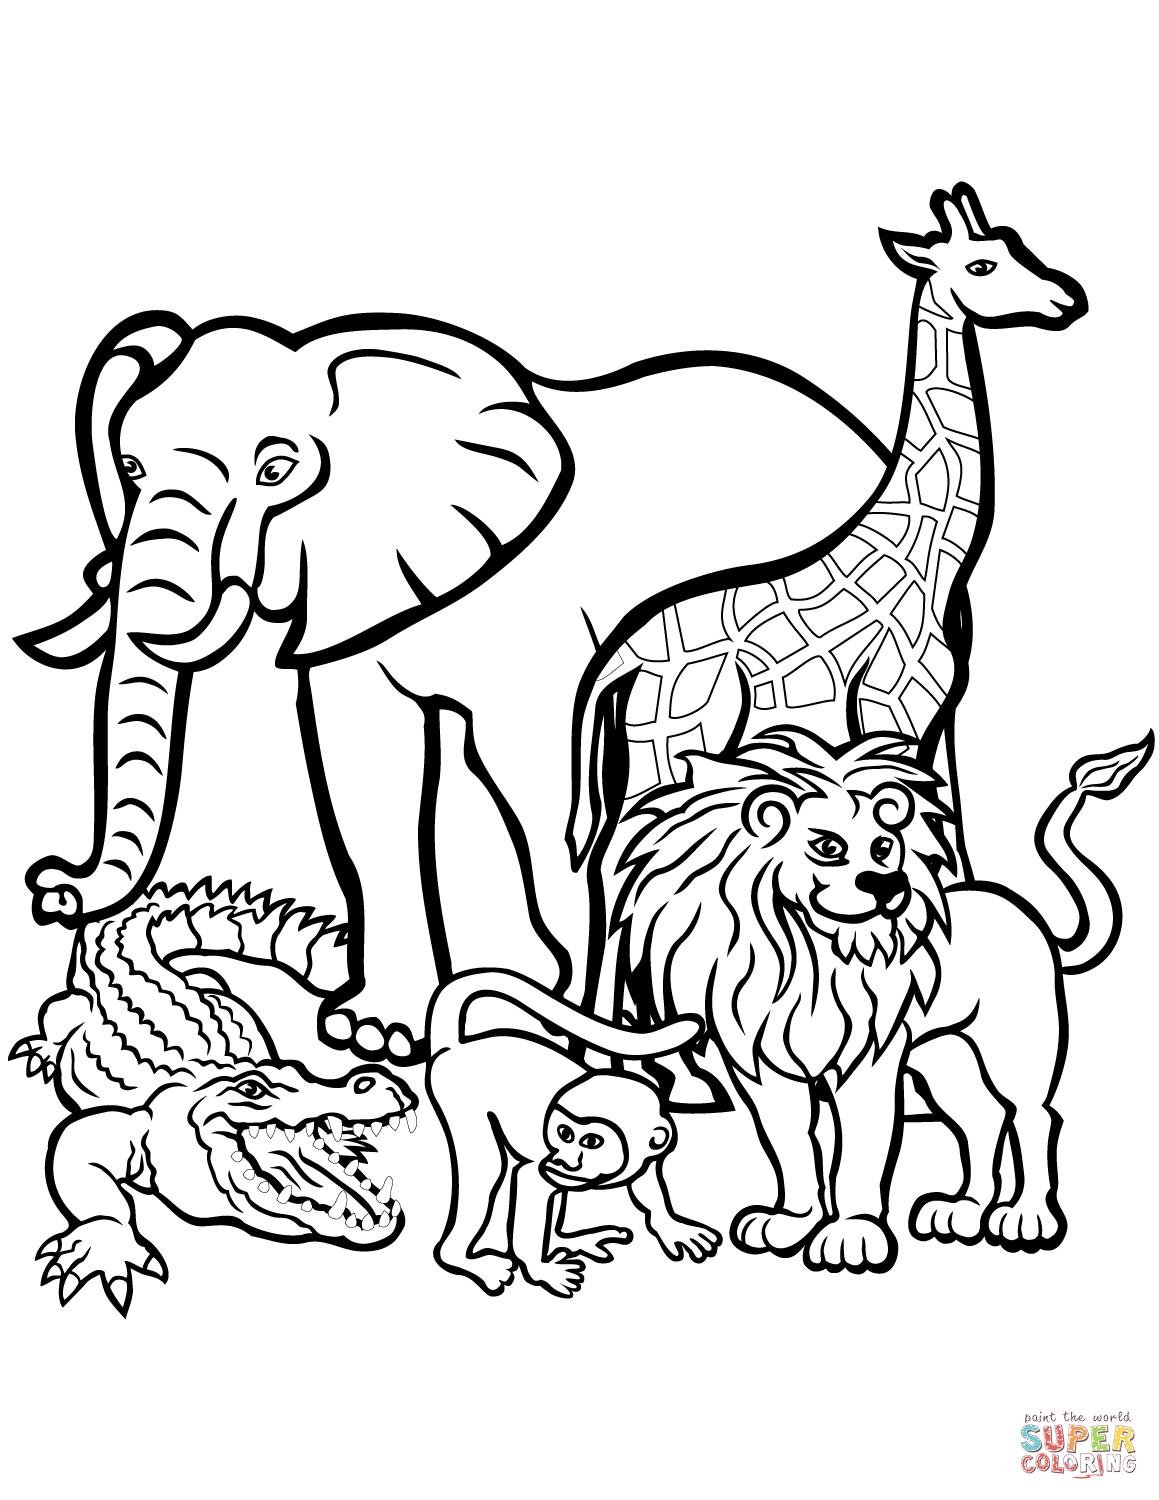 African Animals Coloring Page | Free Printable Coloring Pages - Free Coloring Pages Animals Printable